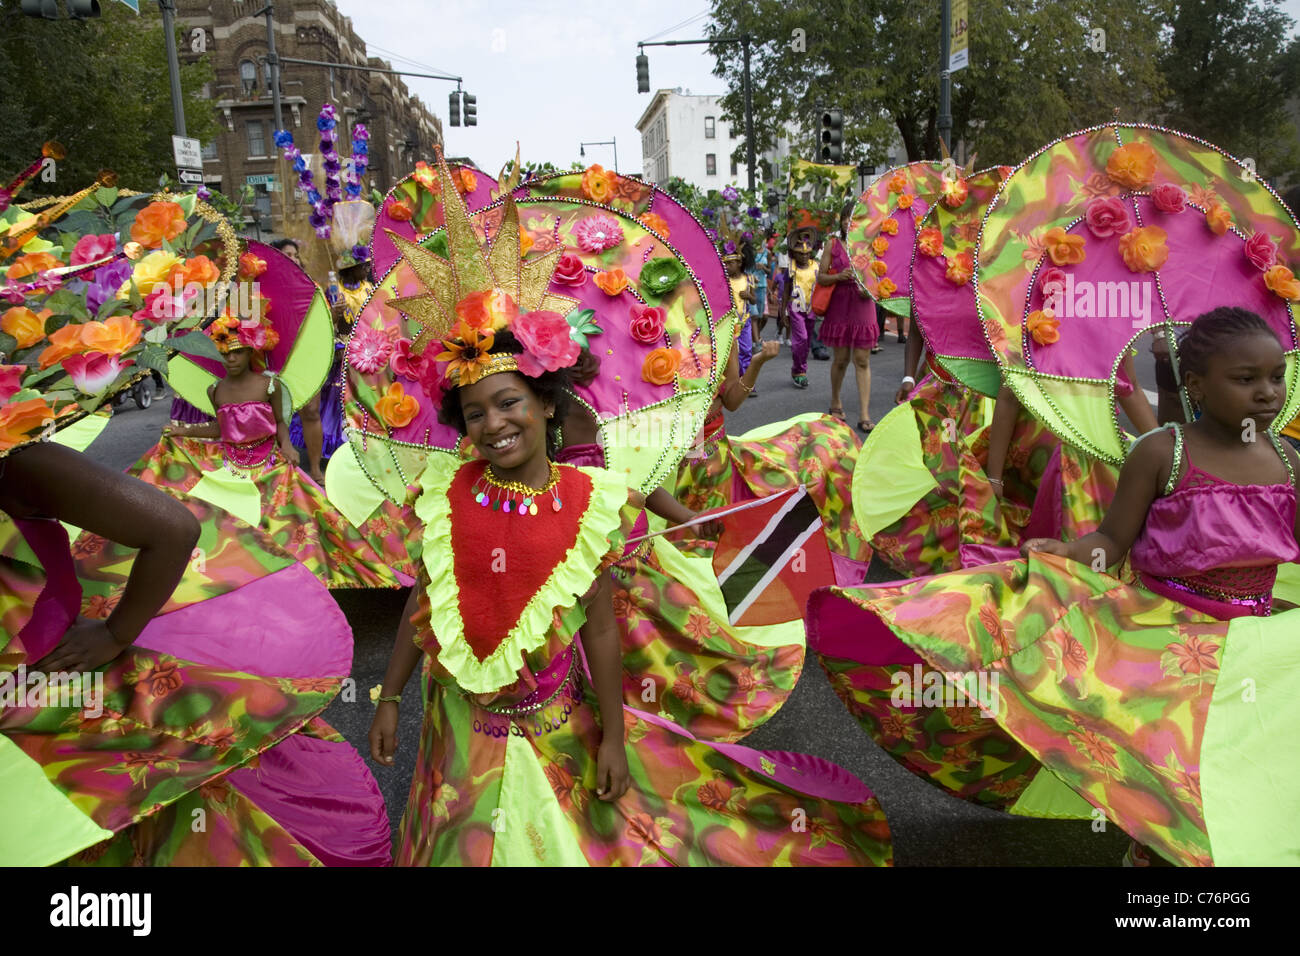 2011; West Indian/Caribbean Kiddies Parade, Crown Heights, Brooklyn, New York. Stock Photo